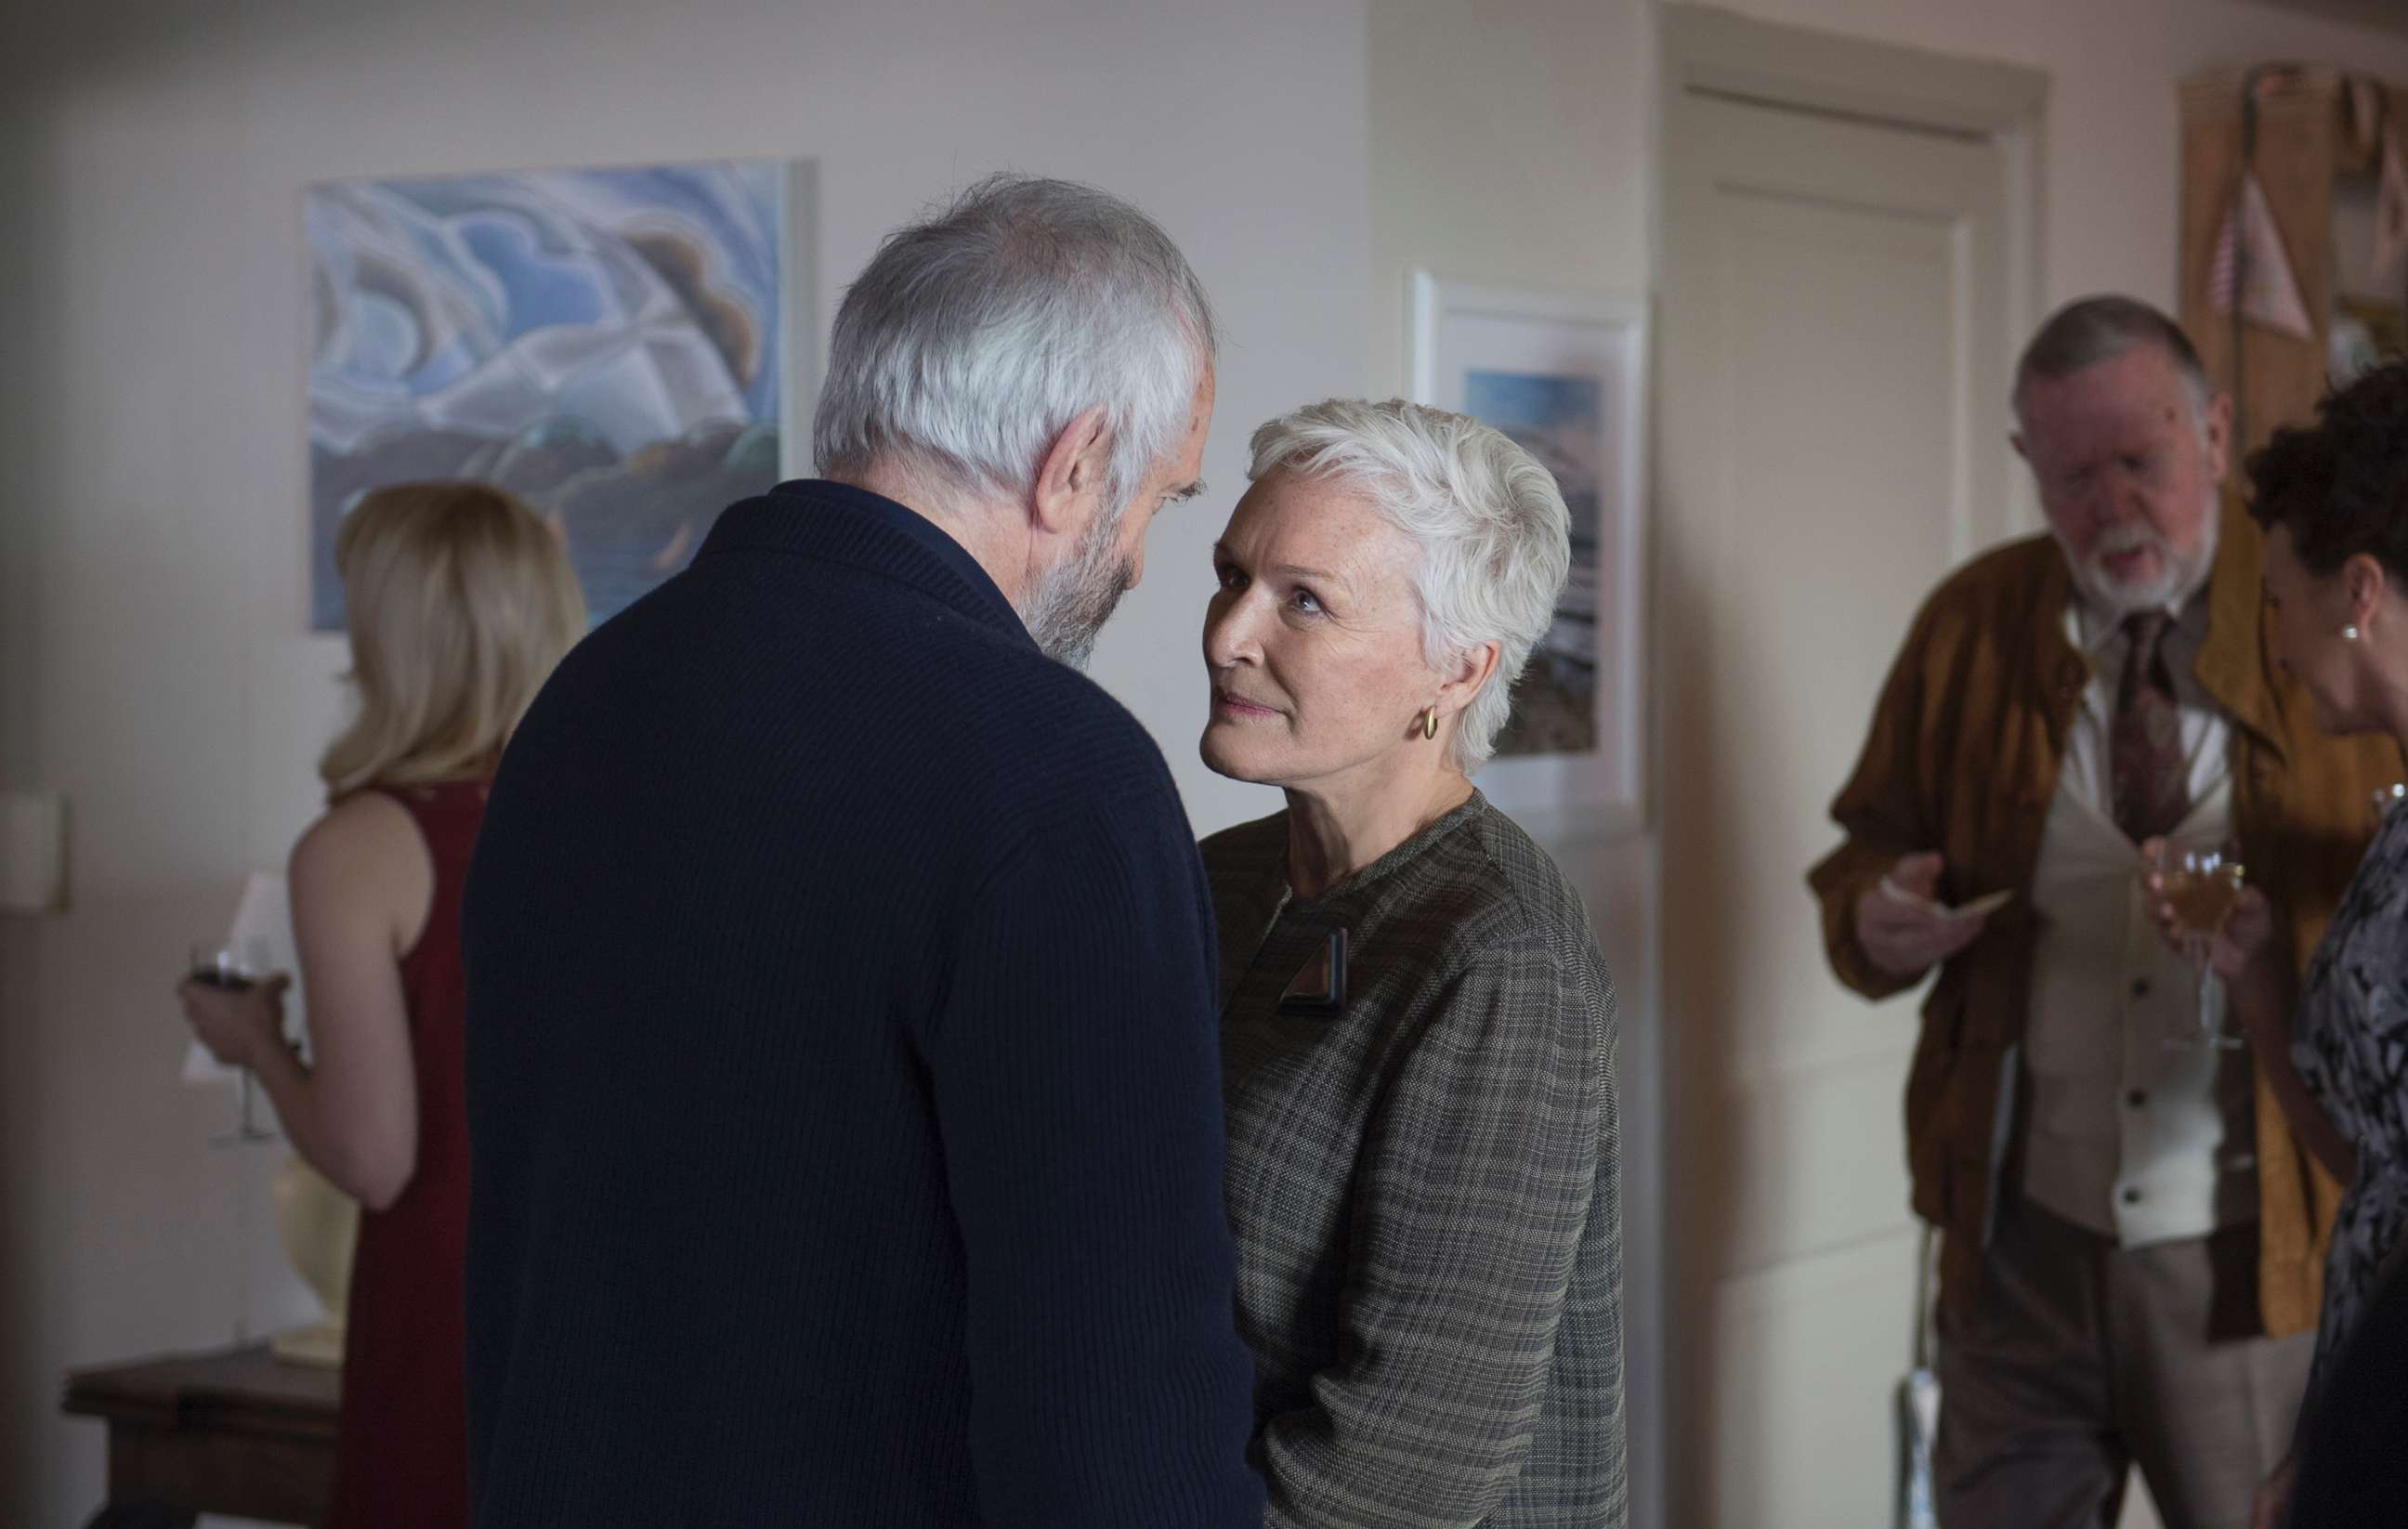 PHOTO: A scene from the movie, "The Wife" with Jonathan Pryce as Joe and Glenn Close as Joan.